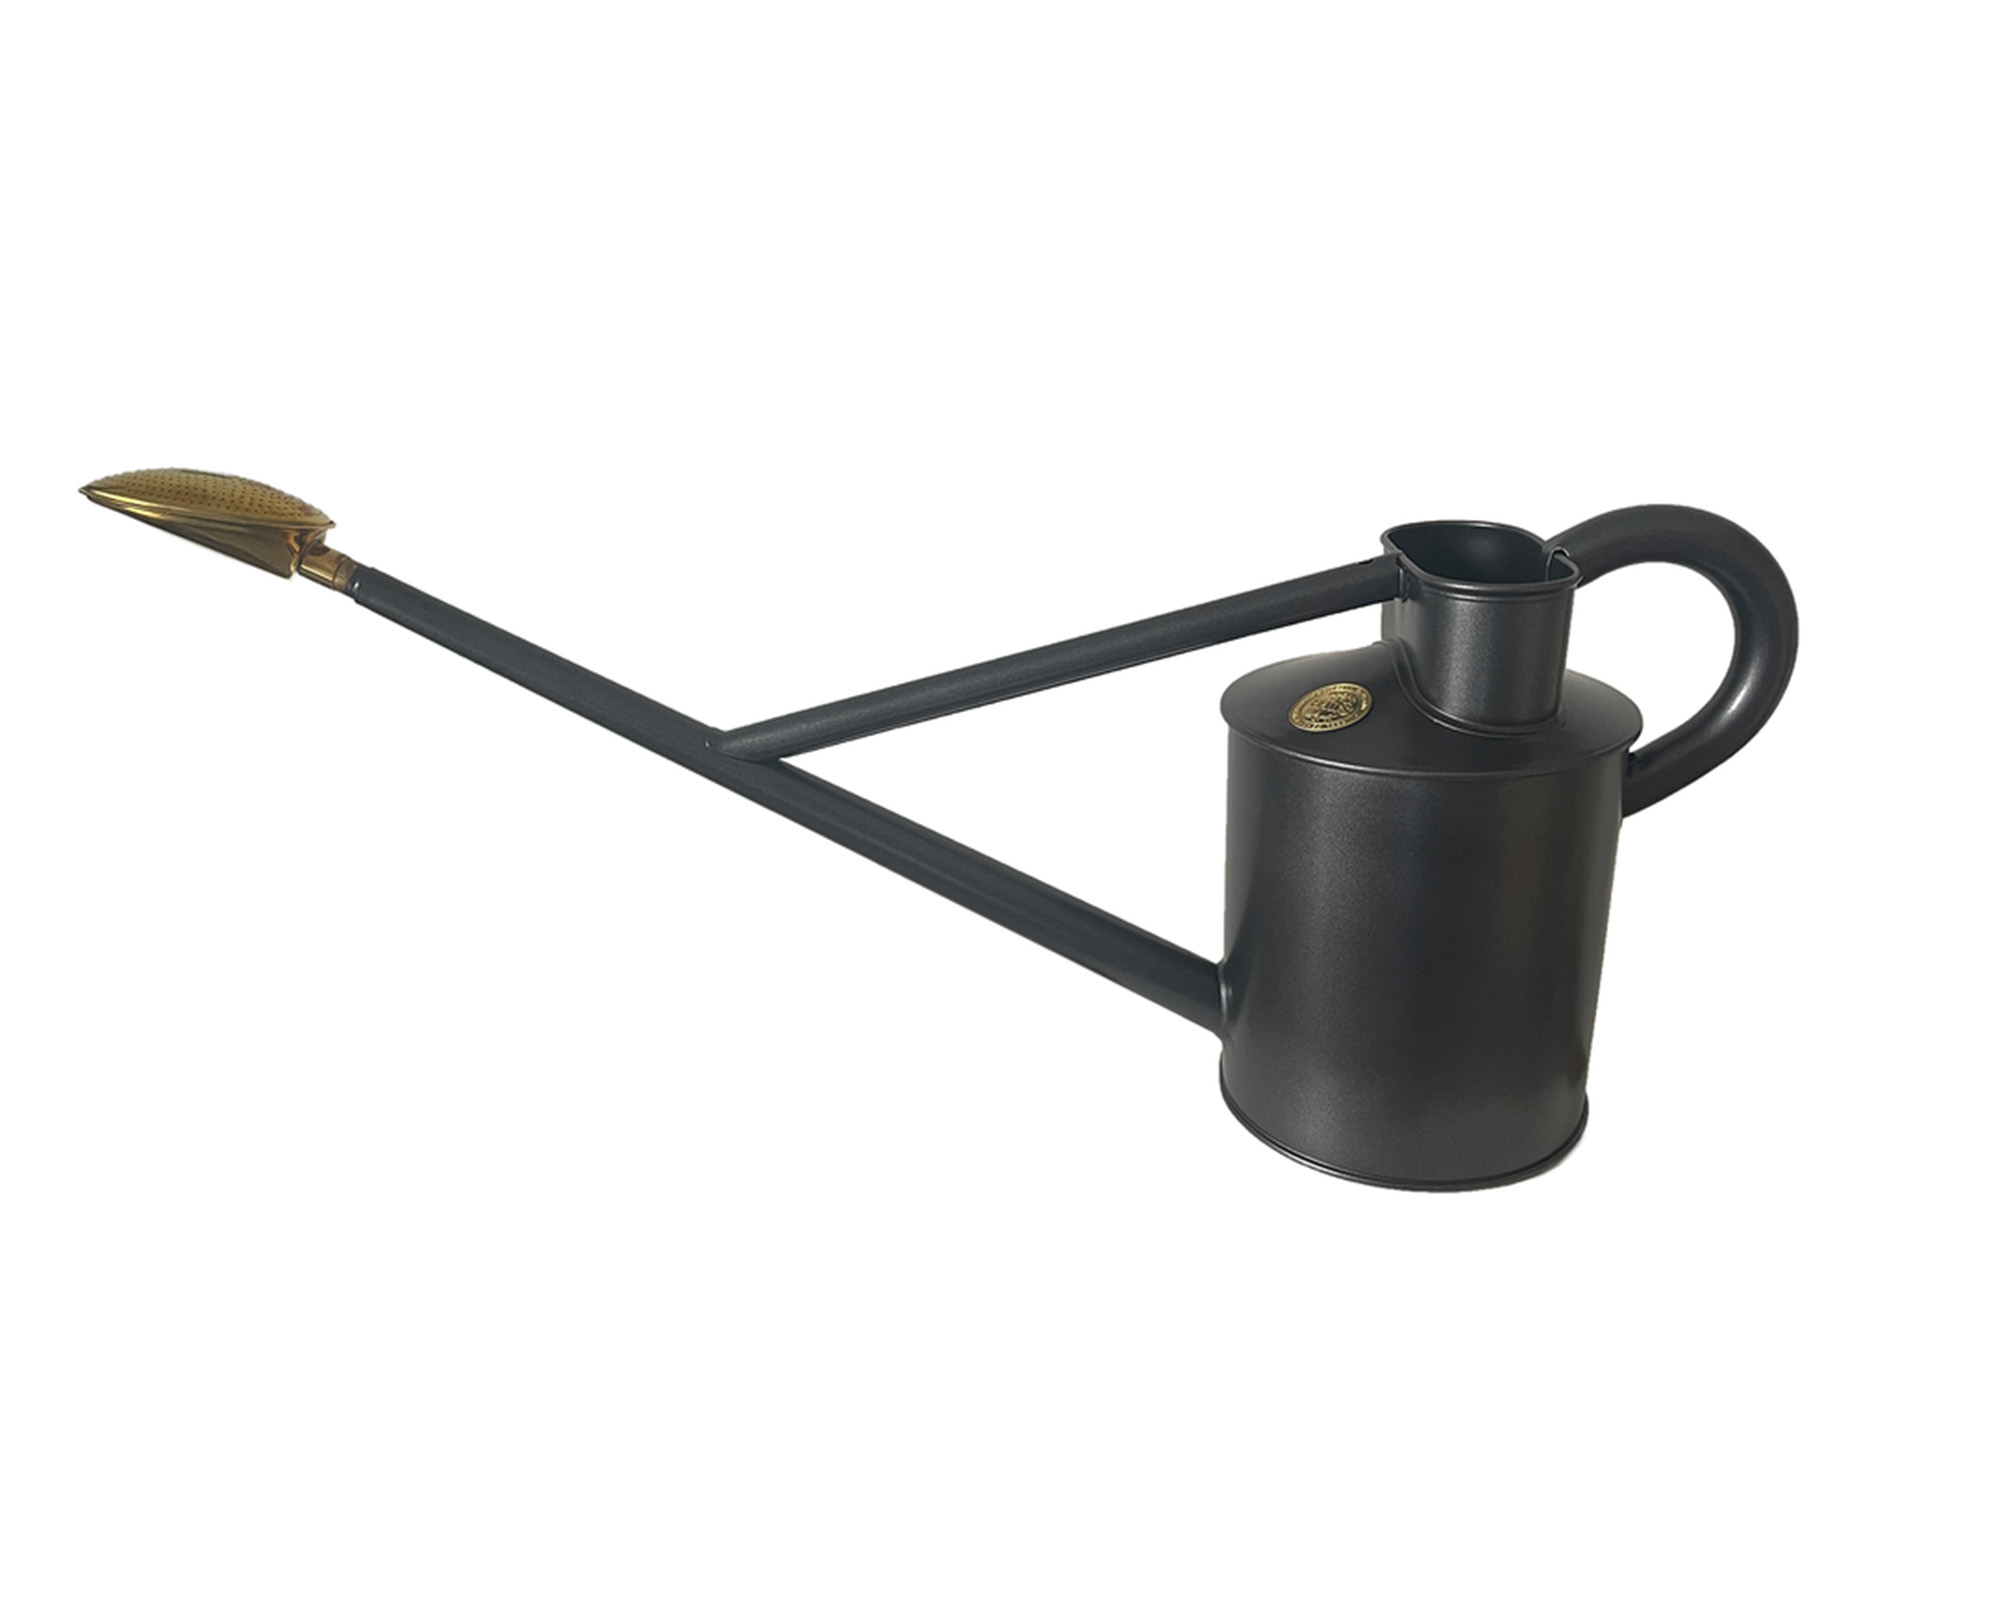 Warley Fall 1 gallon (longreach) watering can by Haws- now available in Graphite